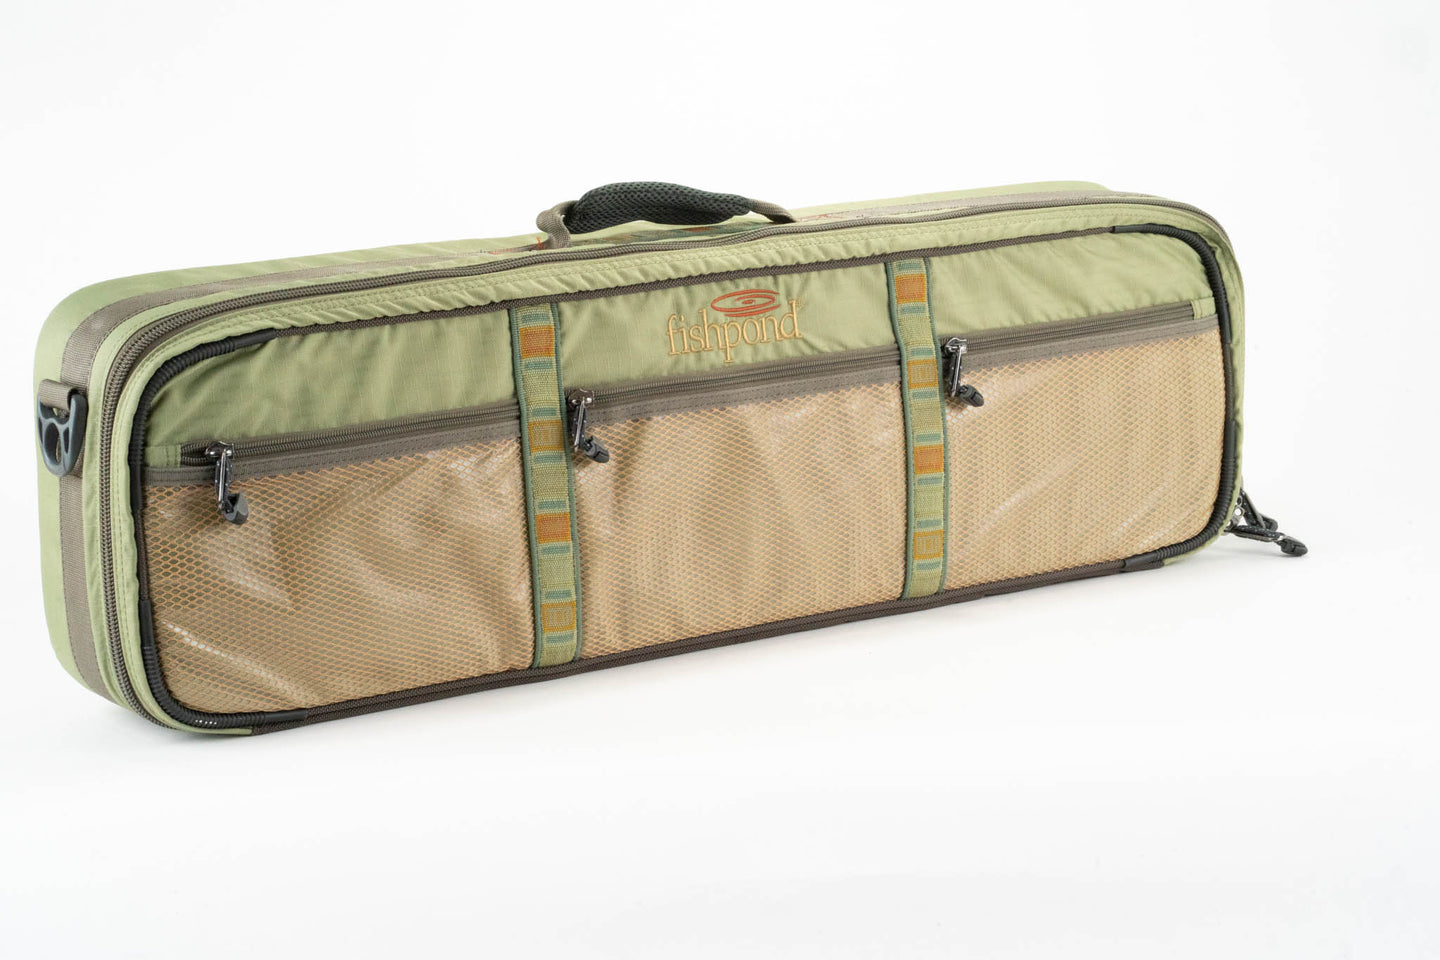 Fishpond Carry-On Rod and Reel Case